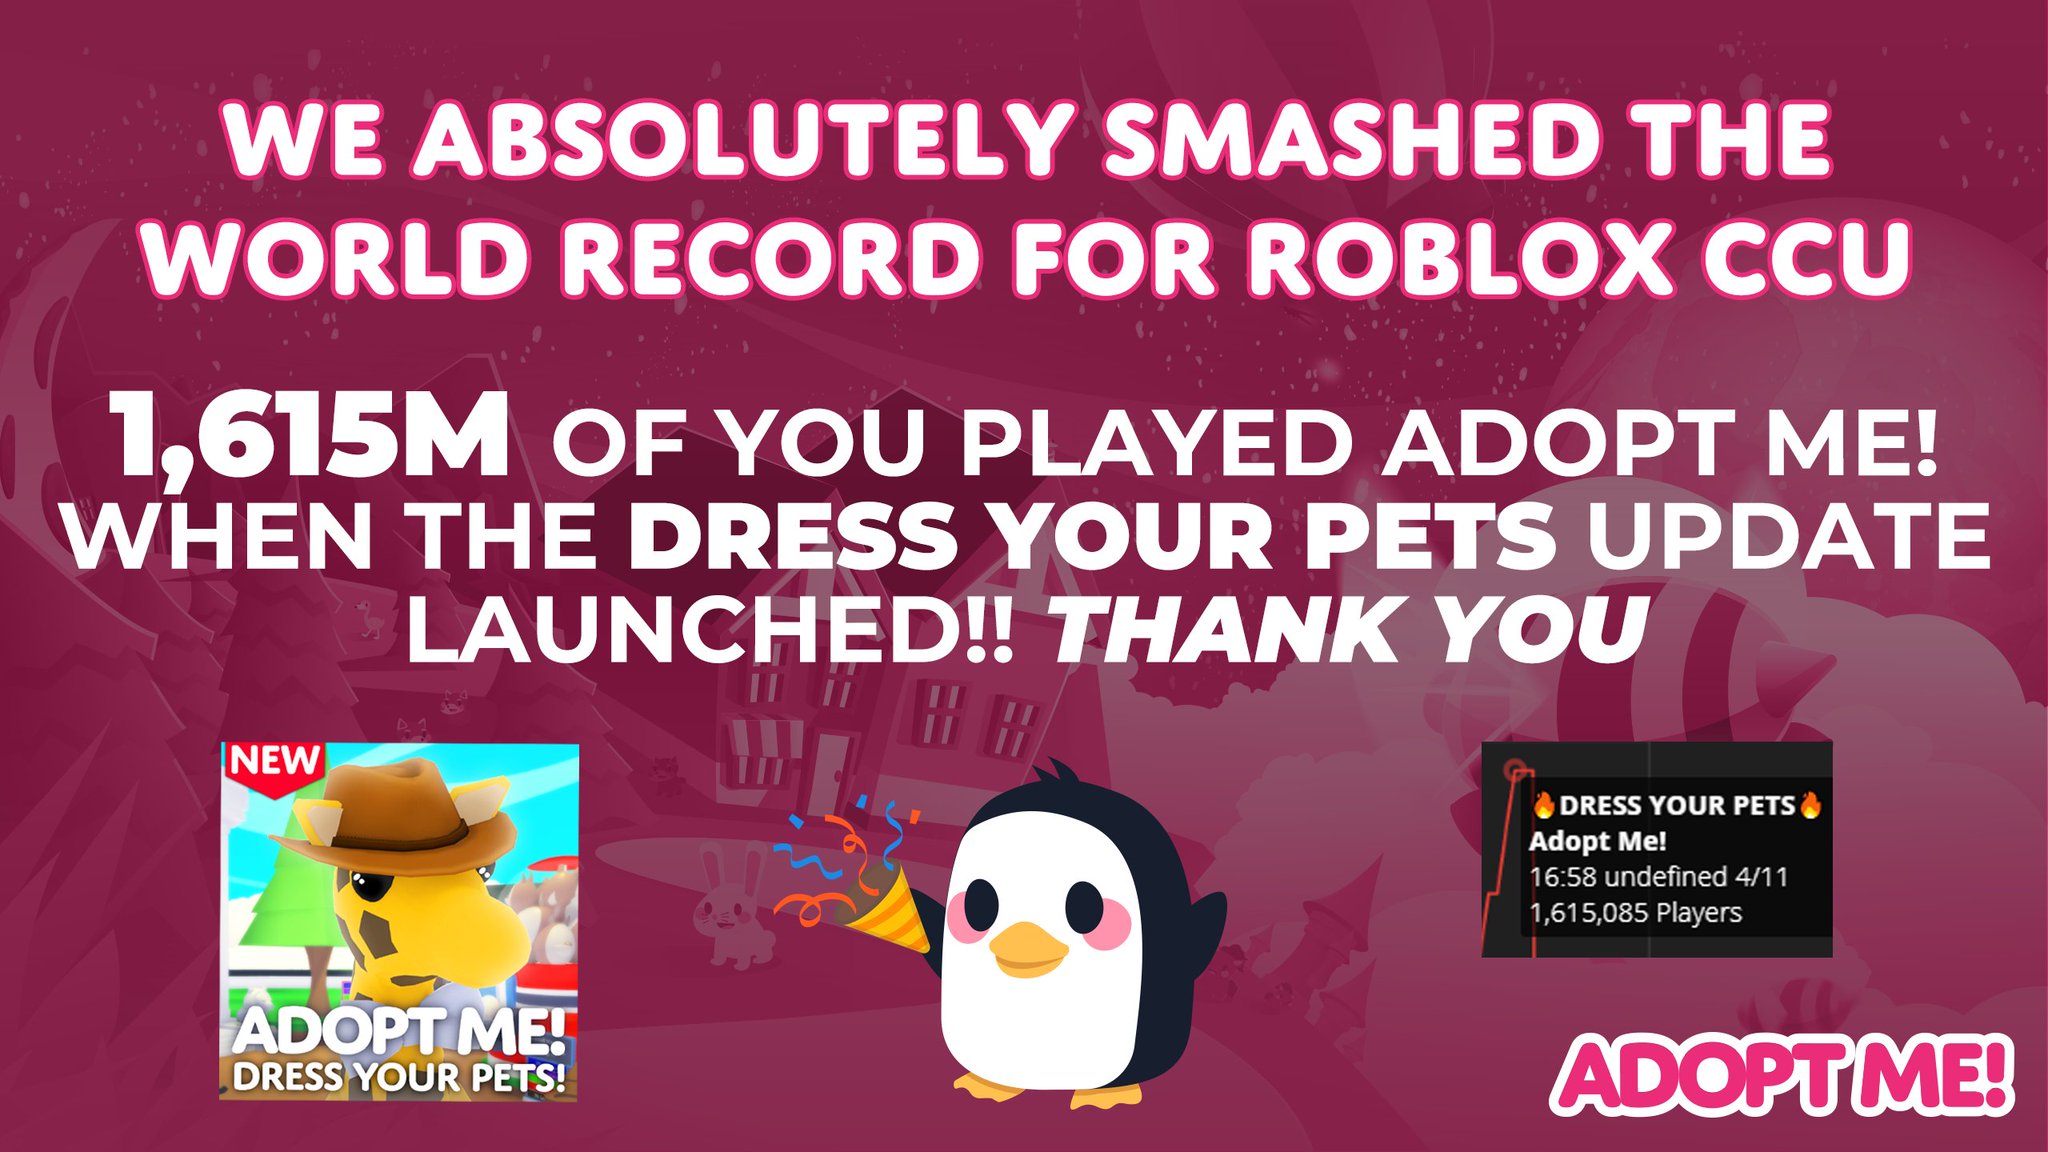 Adopt Me On Twitter The New World Record For Roblox Ccu Players Active Is 1 615 Million Players Thank You So Much For Tuning In To See The Live Event And Apologies - me roblox account